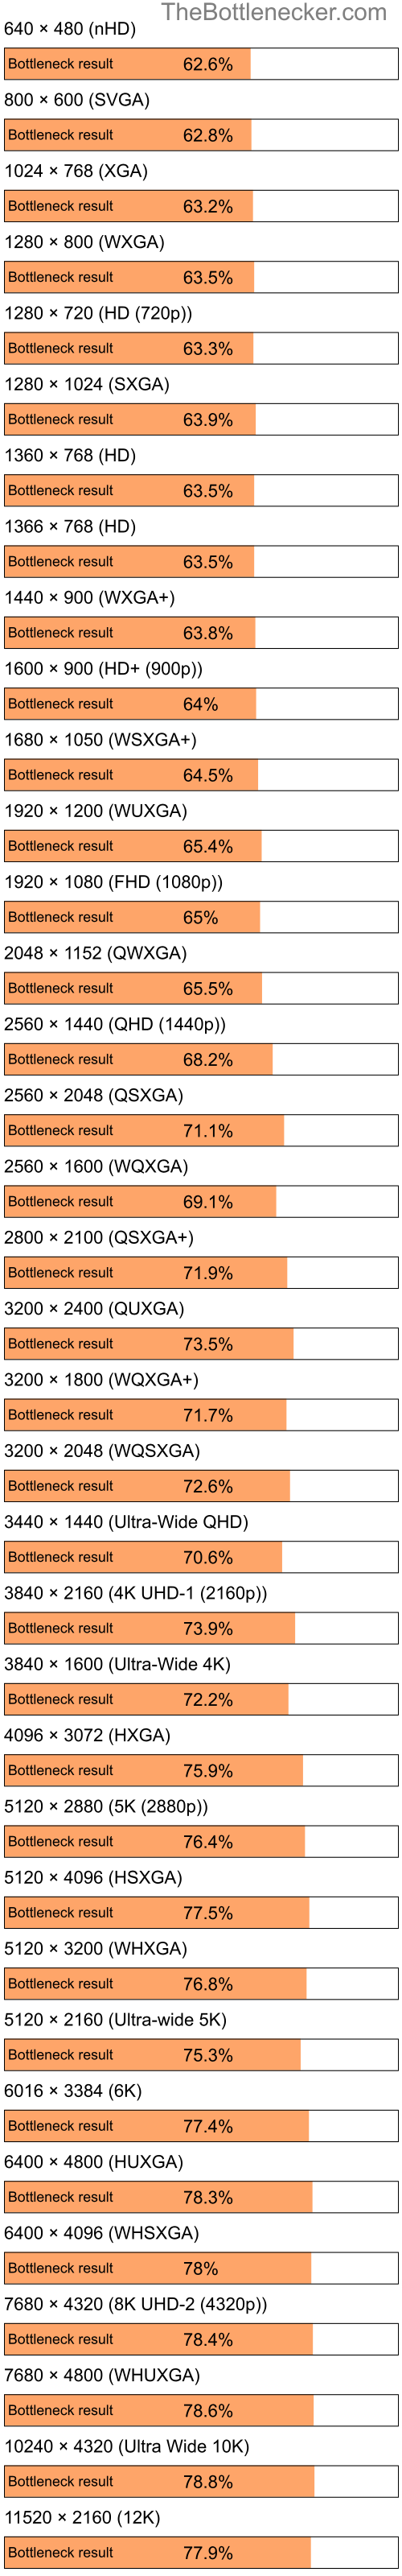 Bottleneck results by resolution for Intel Pentium 4 and NVIDIA Quadro FX 570M in General Tasks